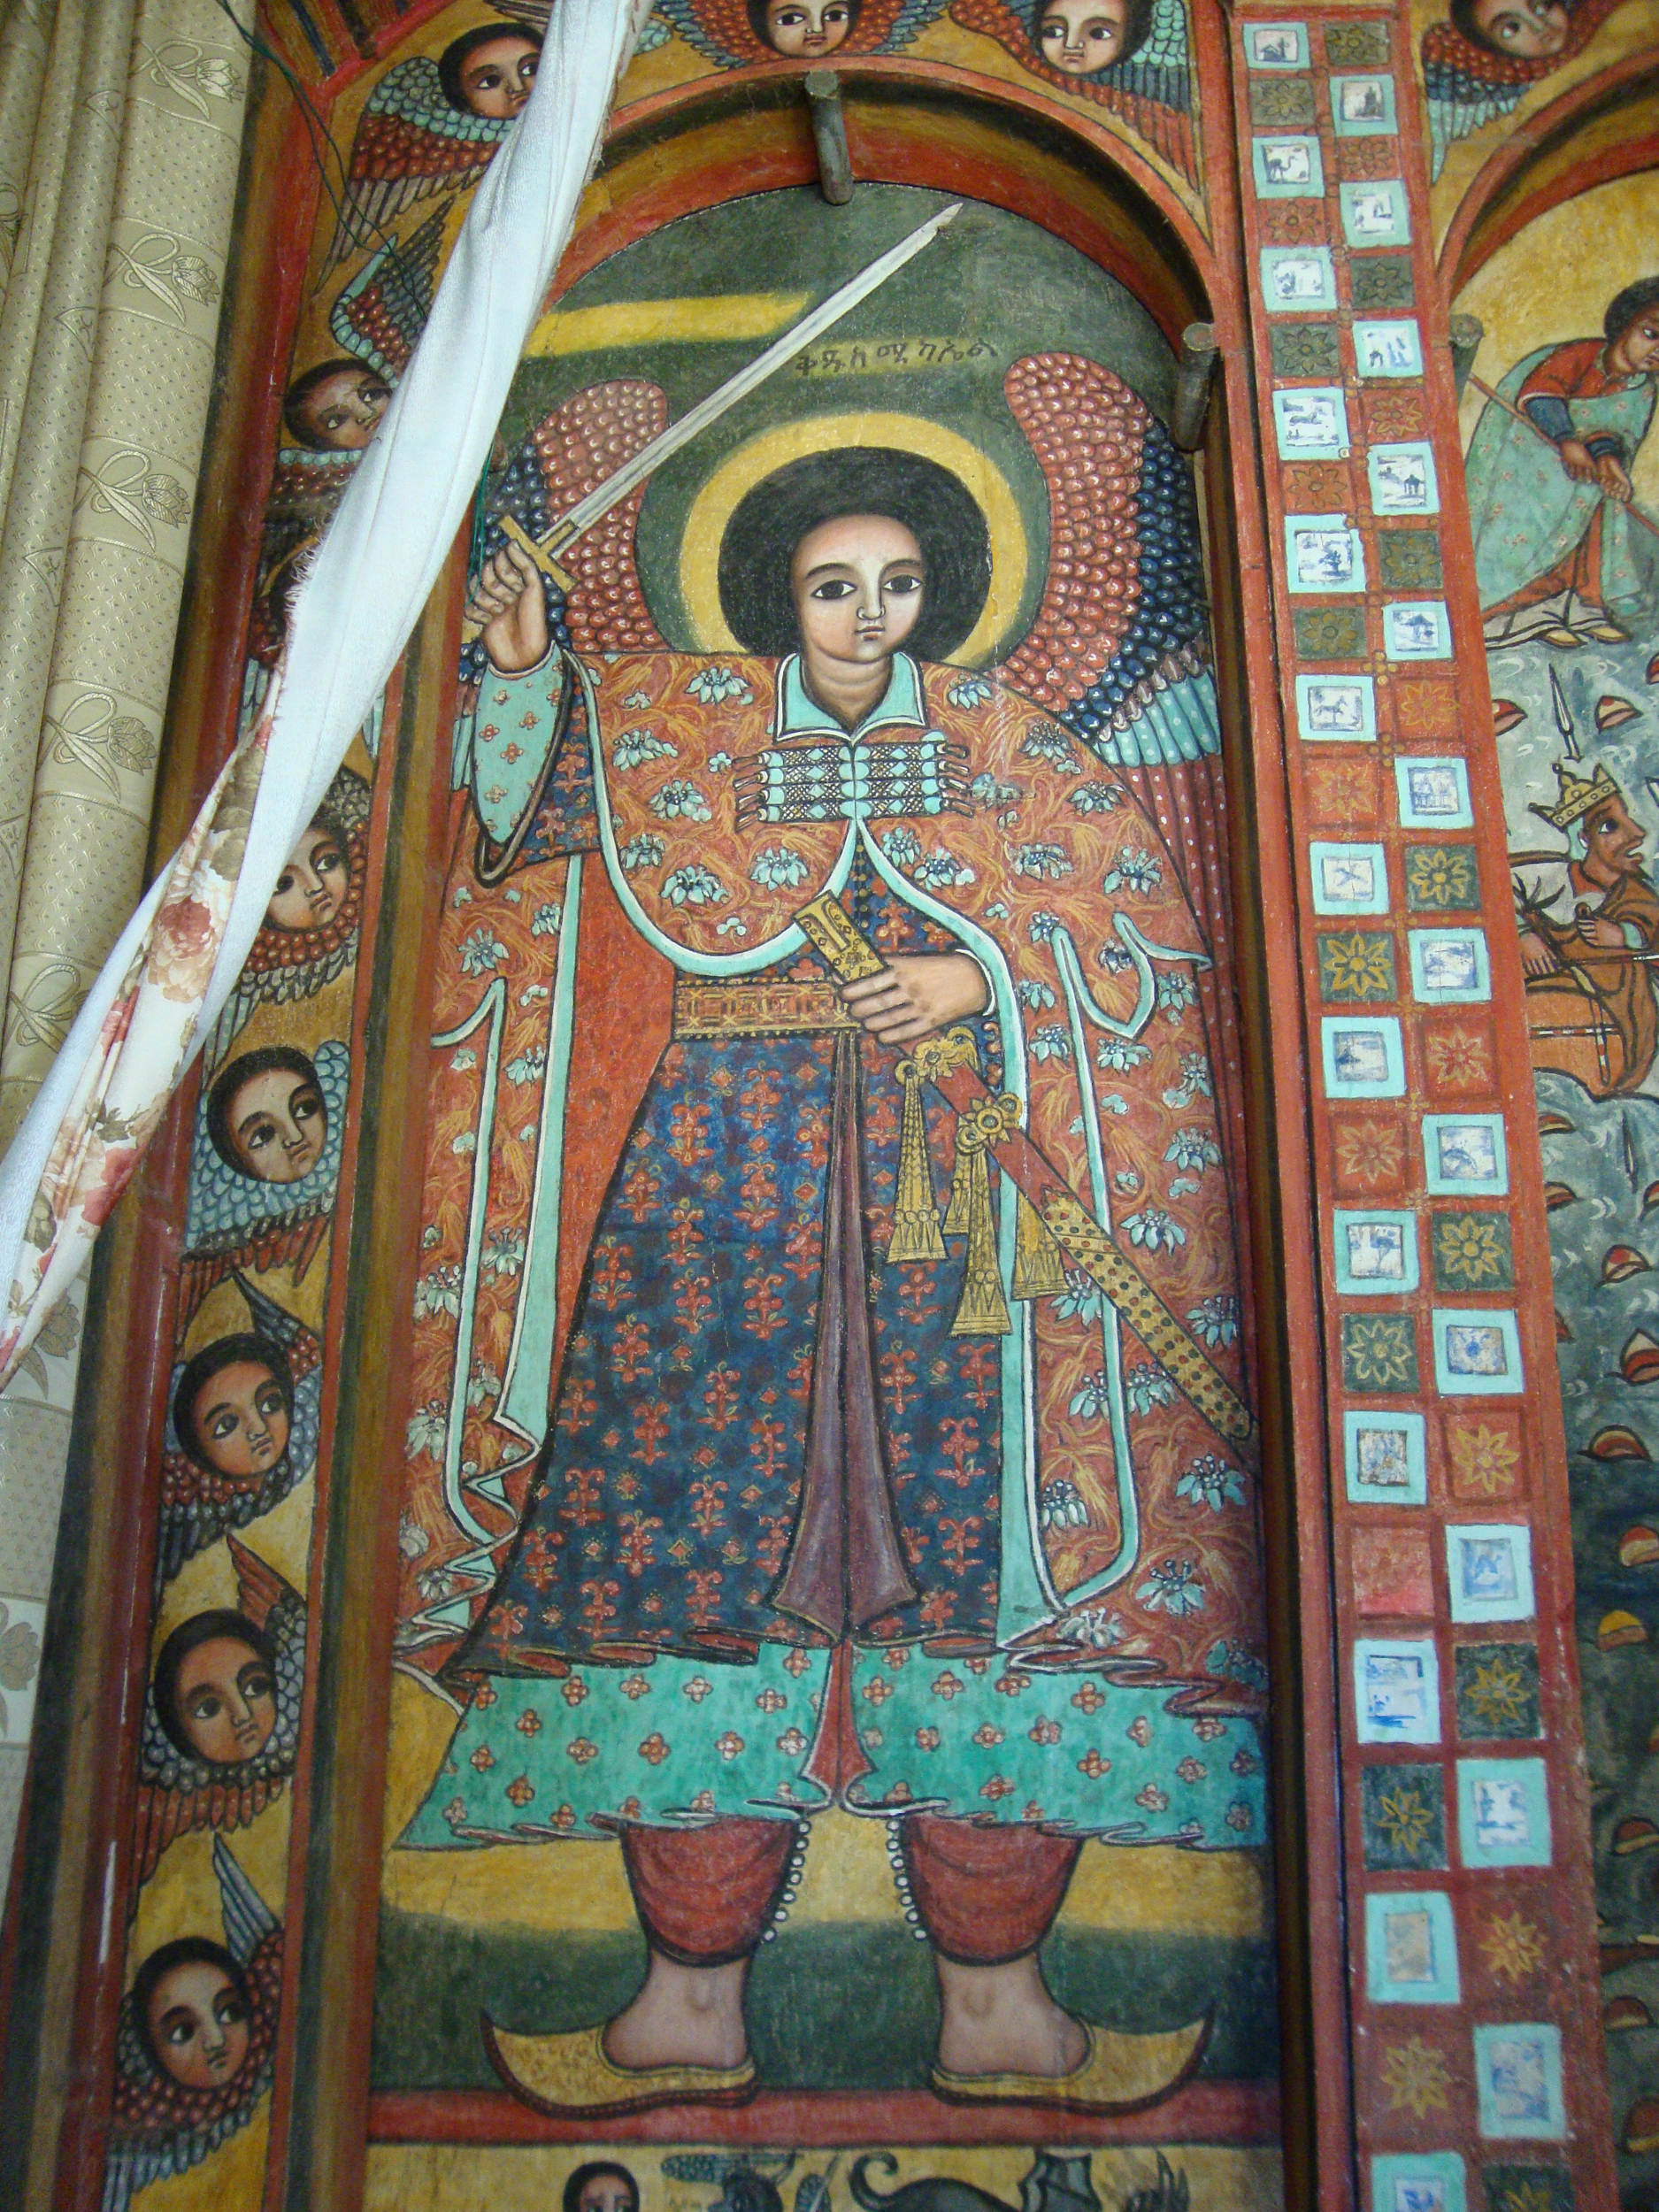 Photograph of Archangel Michael, wall-painting in Narga Selassie monastery. Photograph by Maia Sheridan, January 2013.